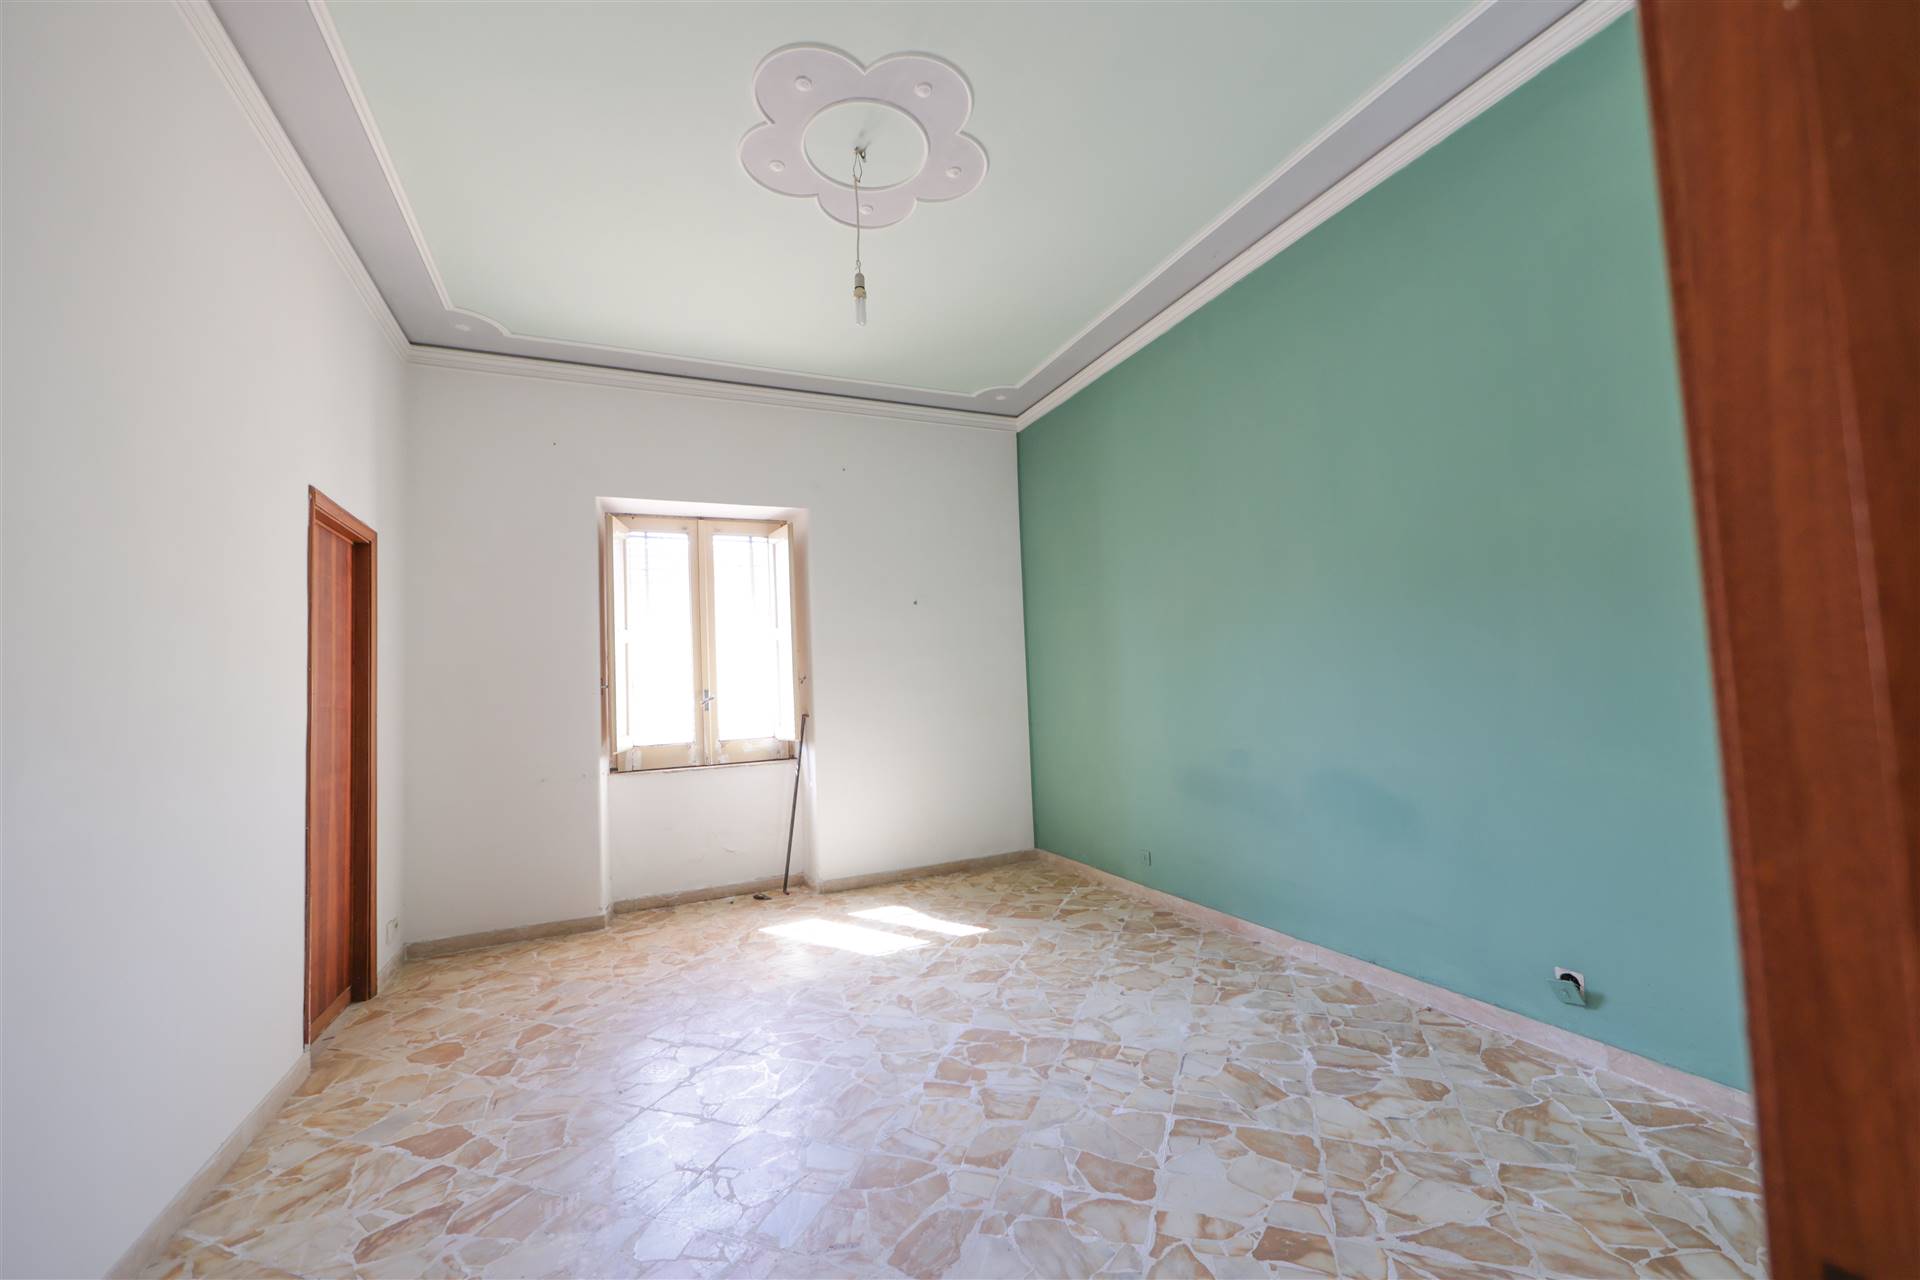 VIAGRANDE, Apartment for sale of 154 Sq. mt., Be restored, Heating Non-existent, Energetic class: G, Epi: 1 kwh/m2 year, placed at Ground, composed by: 5 Rooms, Separate kitchen, , 3 Bedrooms, 2 